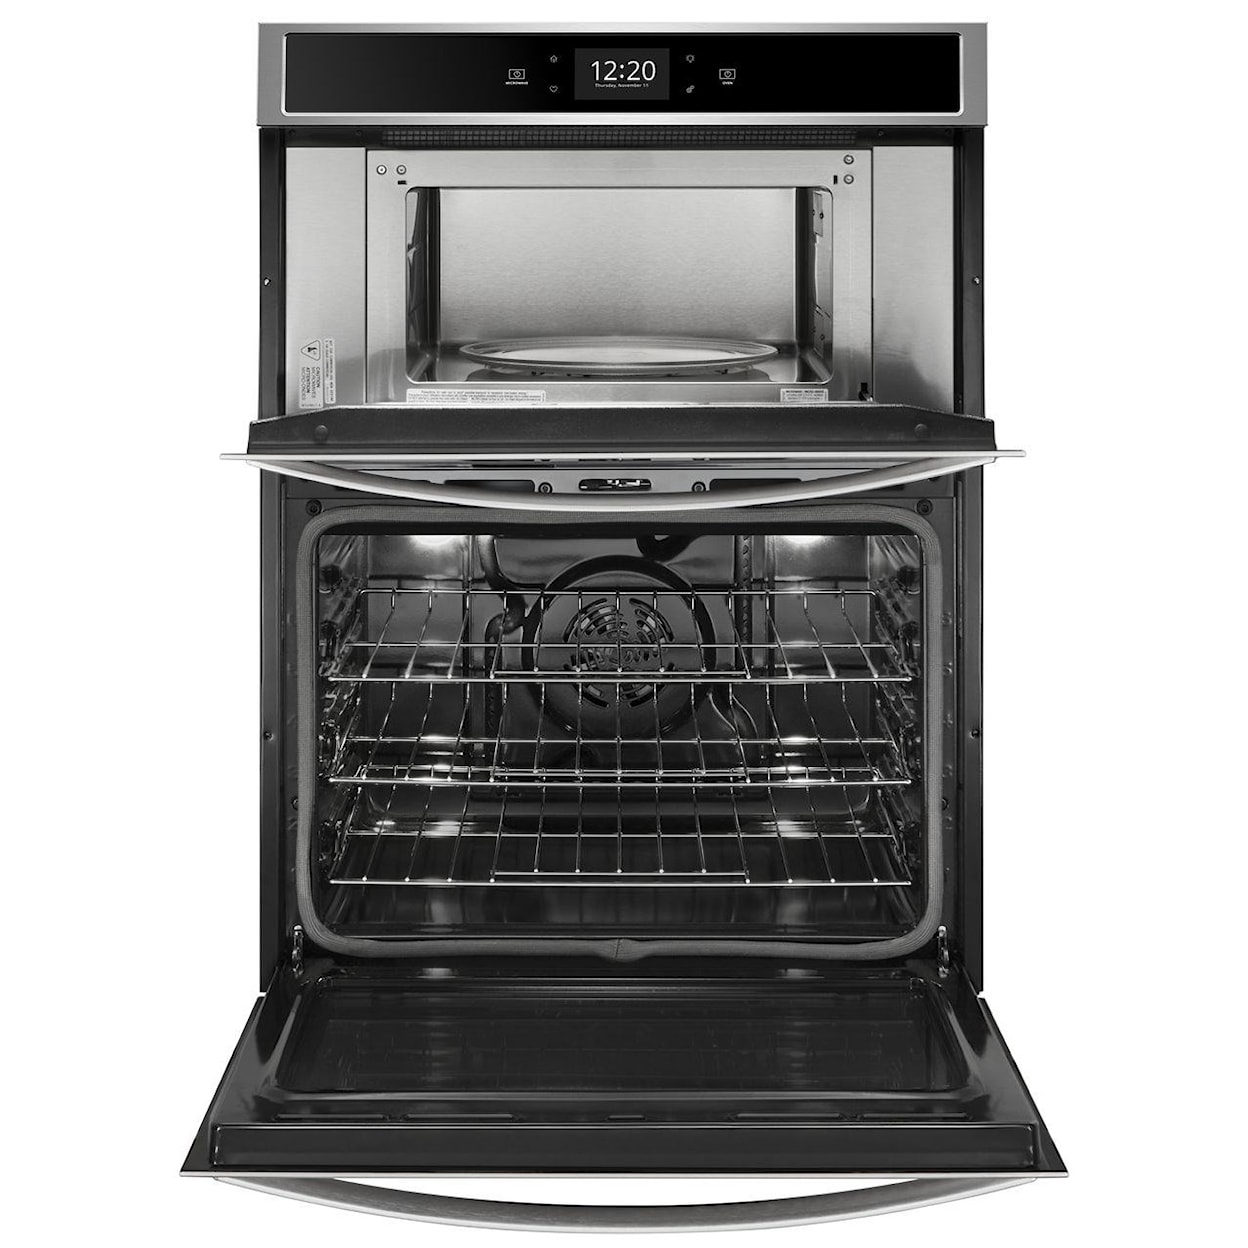 Whirlpool Electric Wall Ovens - Whirlpool 5.7 Cu. Ft. Smart Combination Wall Oven